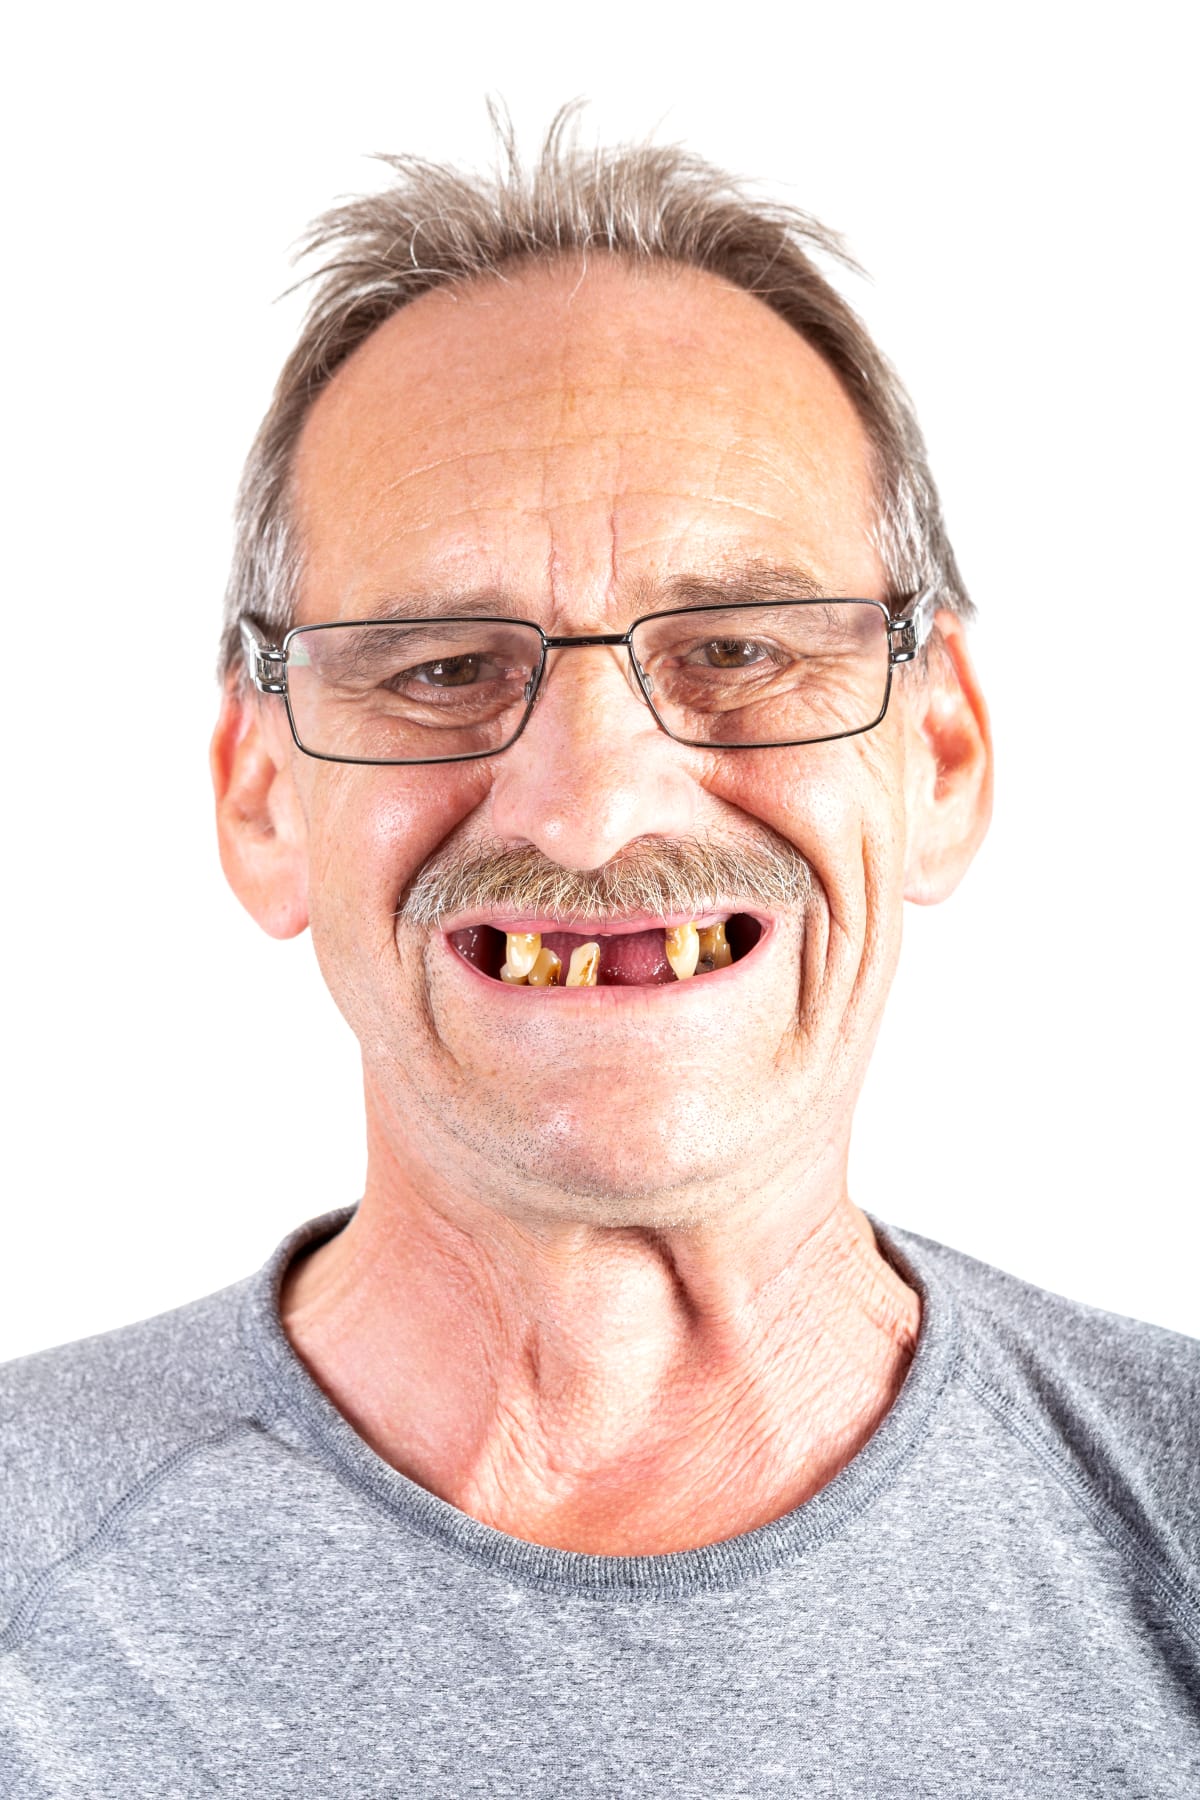 Twenty years with only four teeth